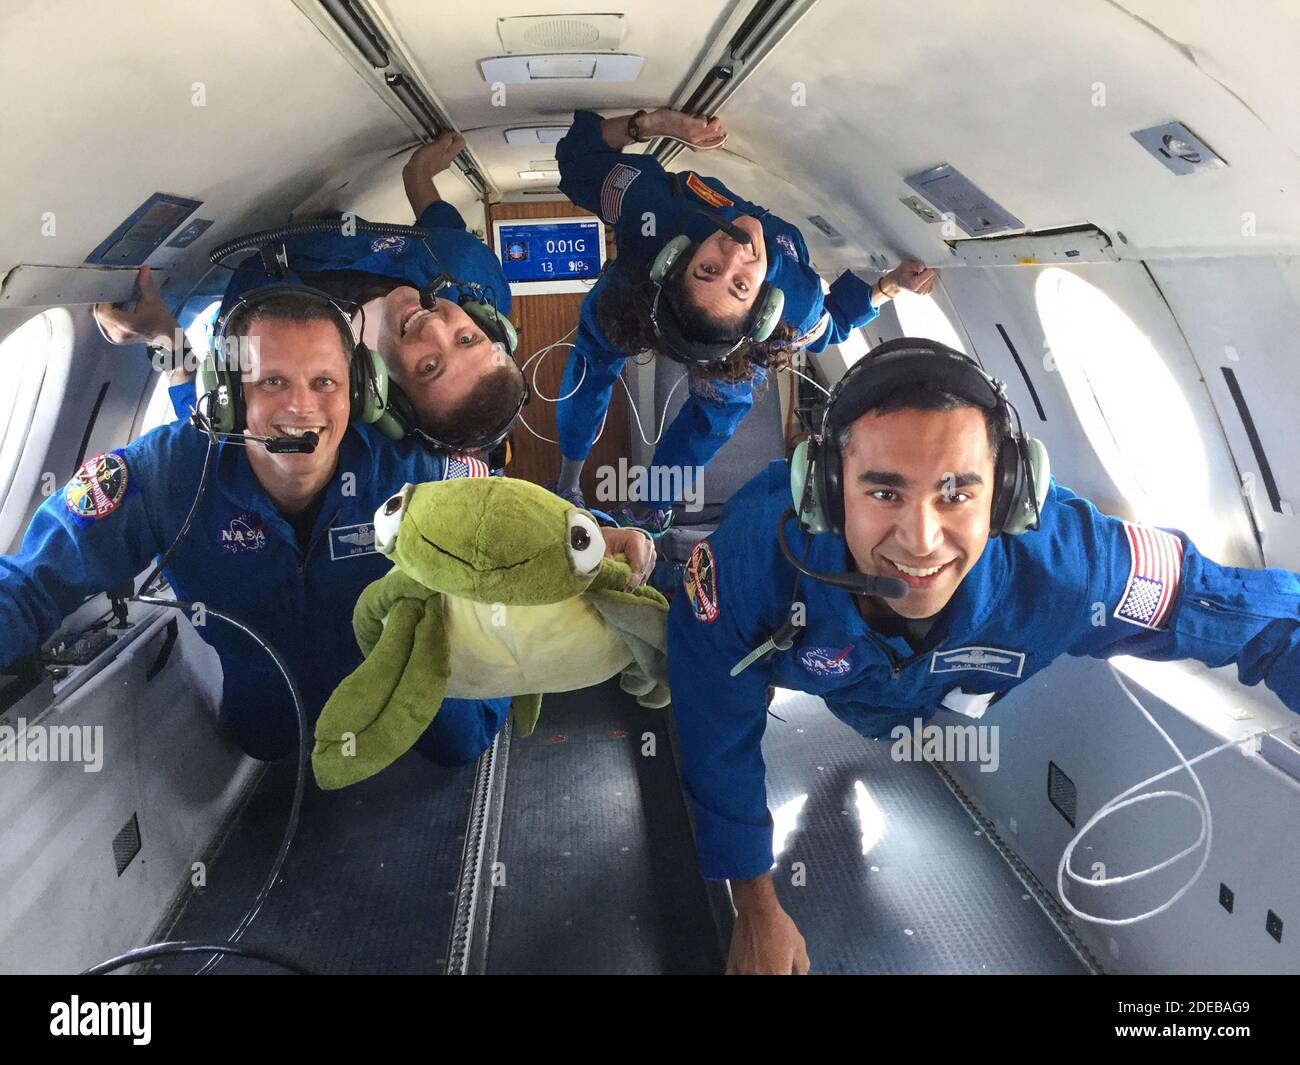 (From left) 2017 NASA astronaut candidates Bob Hines, Matthew Dominick, Jasmin Moghbeli, and Raja Chari take hold to their surroundings during their reduced gravity flight aboard Canadian Space Agency's Dassault Falcon 20 Jet on February 21, 2018. NASA is honoring the first class of astronaut candidates to graduate under the Artemis program on January 10, 2019, at the agency's Johnson Space Center in Houston. After completing more than two years of basic training, these candidates will become eligible for spaceflight, including assignments to the International Space Station, Artemis missions t Stock Photo